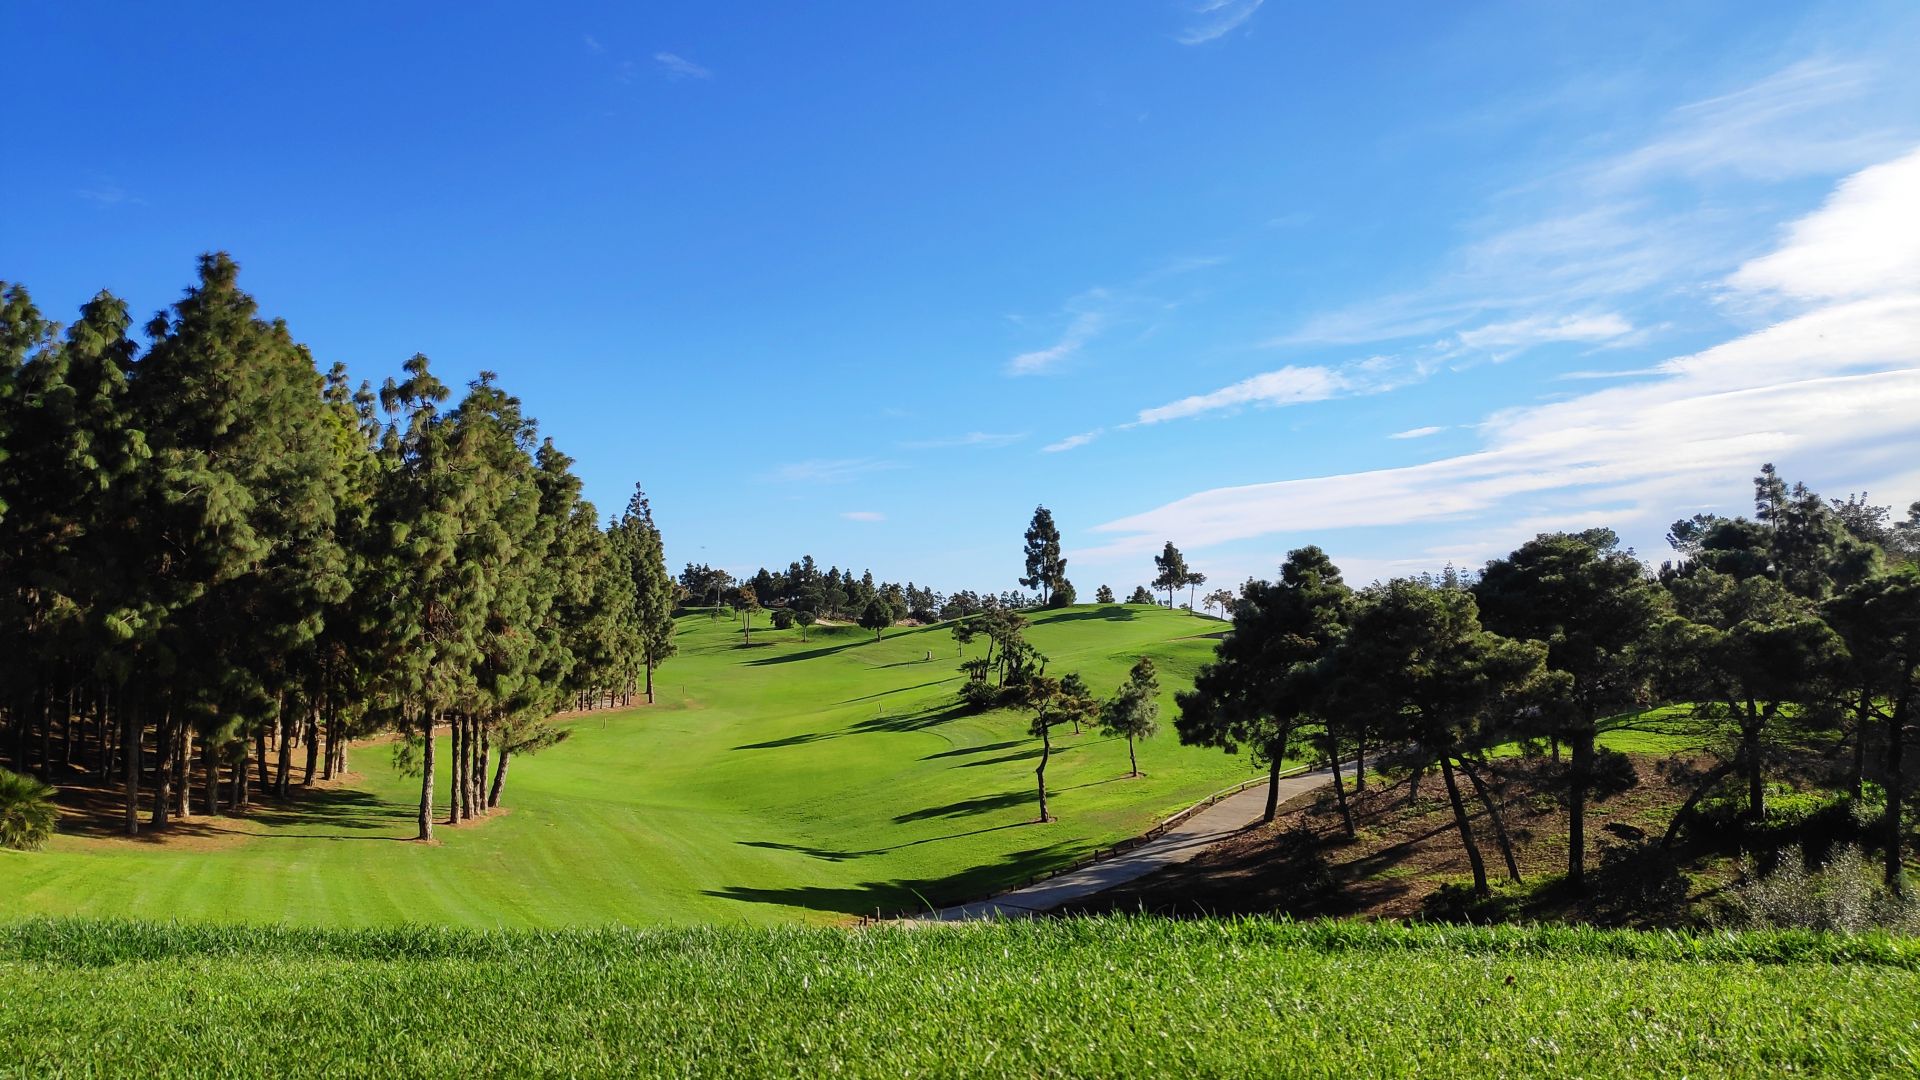 El Chaparral Golf Course on the Costa Del Sol for Golf Breaks in Spain